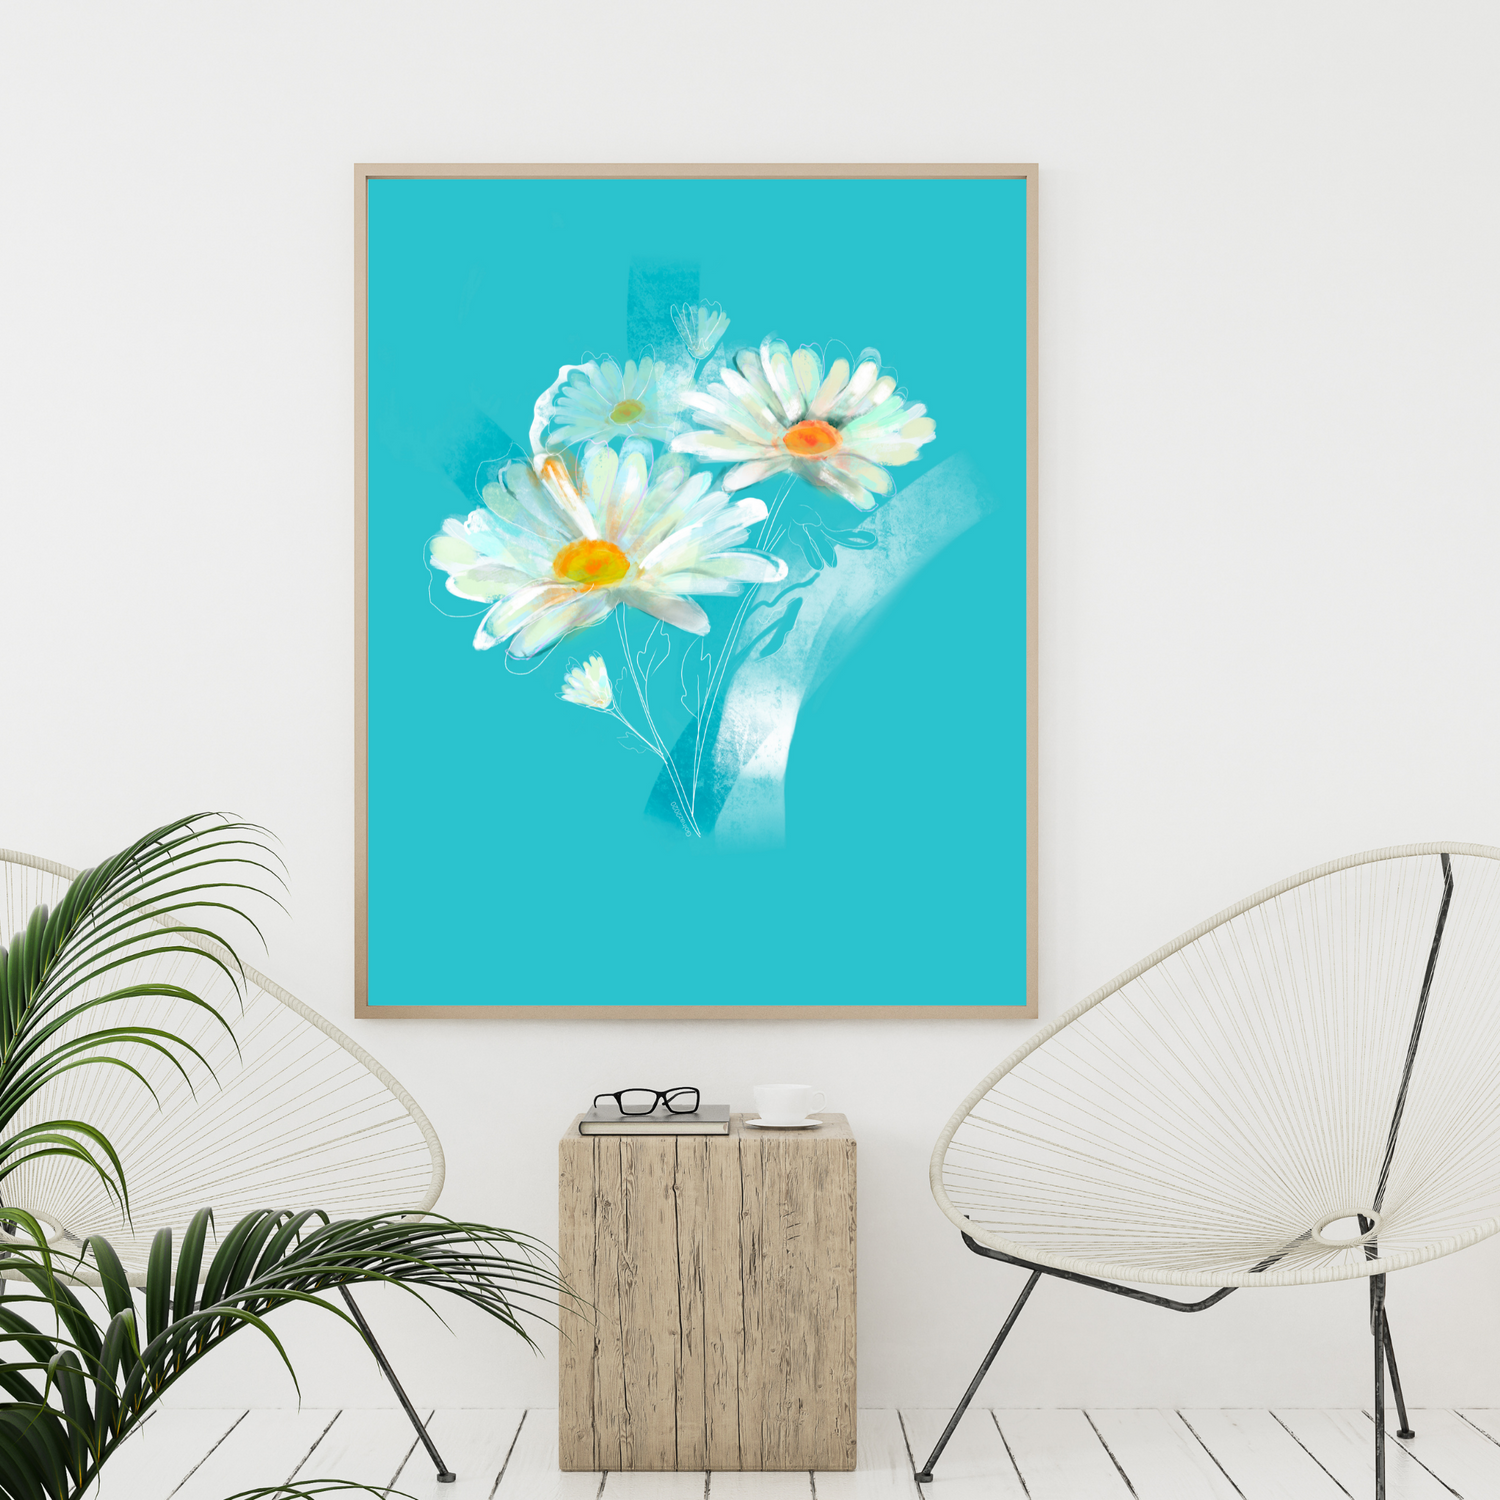 An example of the Daisy painting by ArisaTeam over a chair